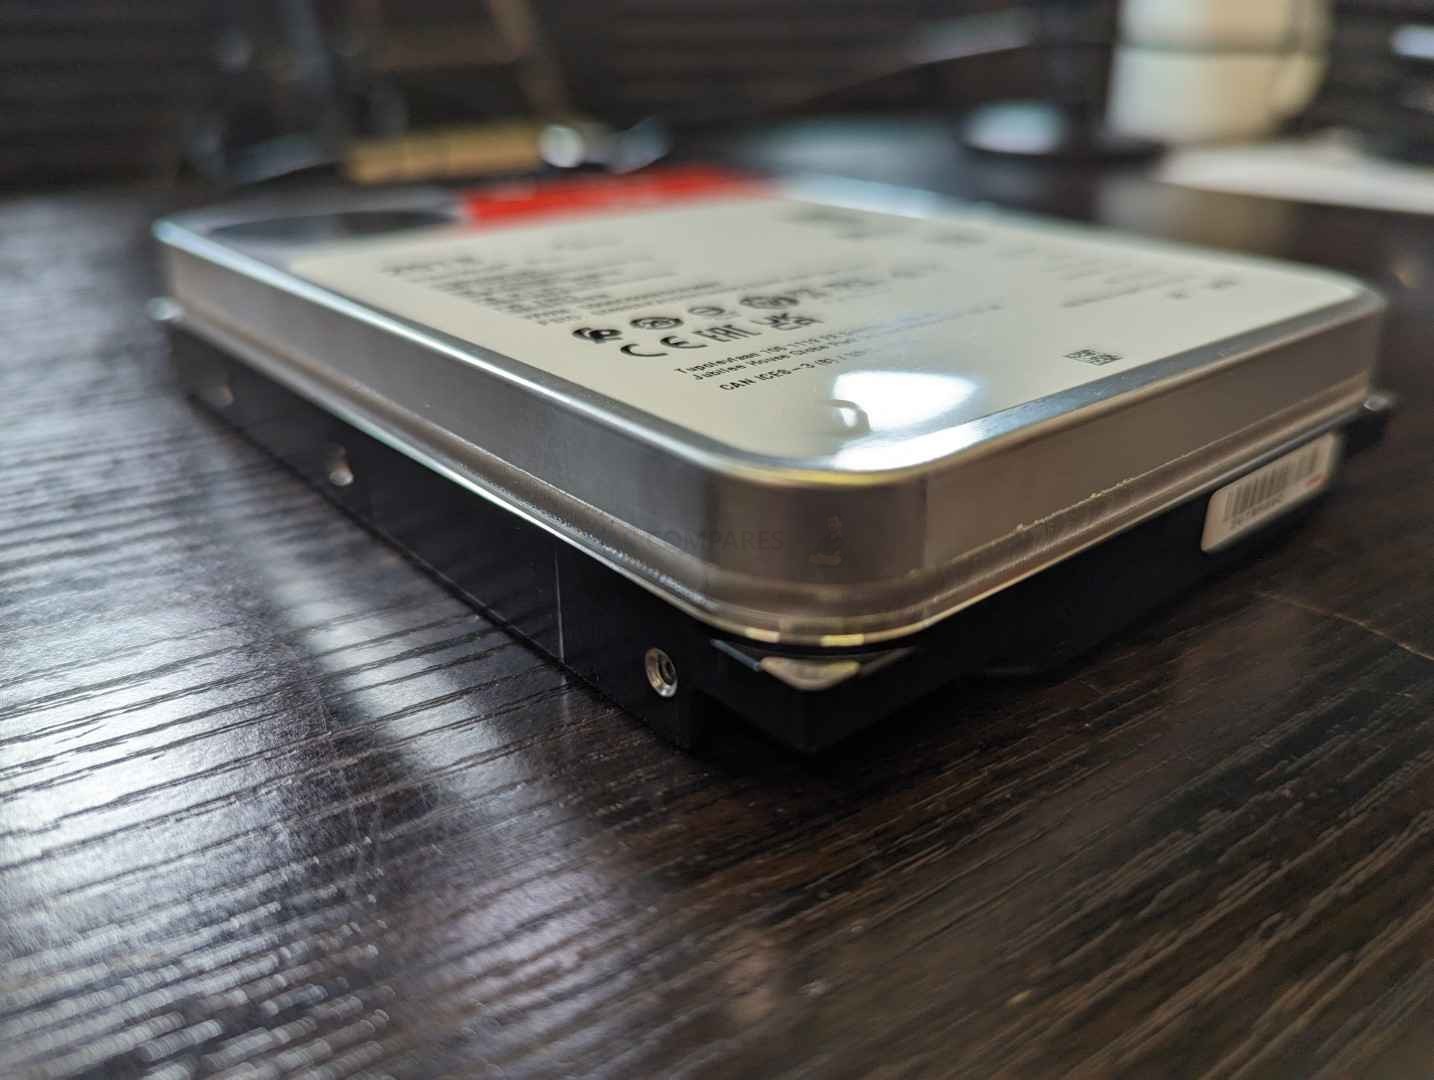 Seagate IronWolf Pro 20TB NAS HDD Review 